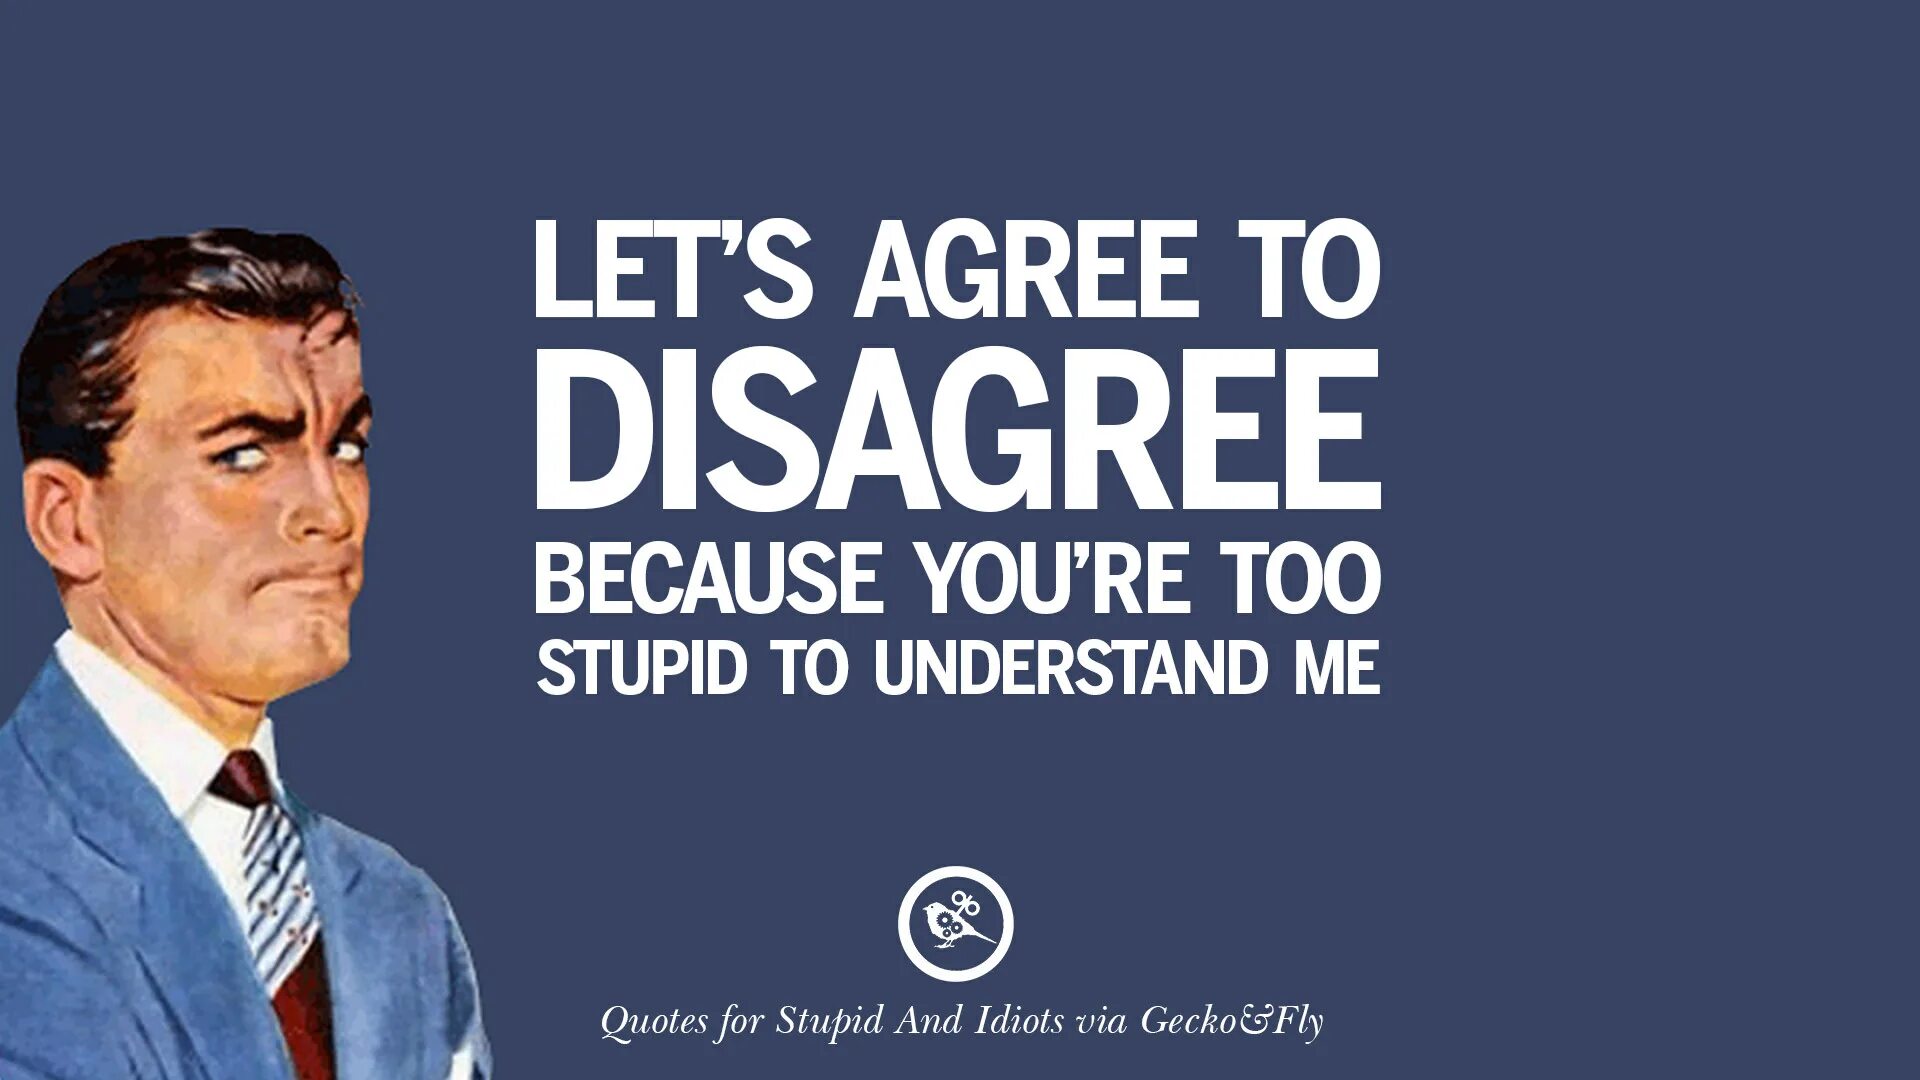 Click to agree. Agree to Disagree. Let;s agree to Disagree. Agree or Disagree phrases. To agree картинки.